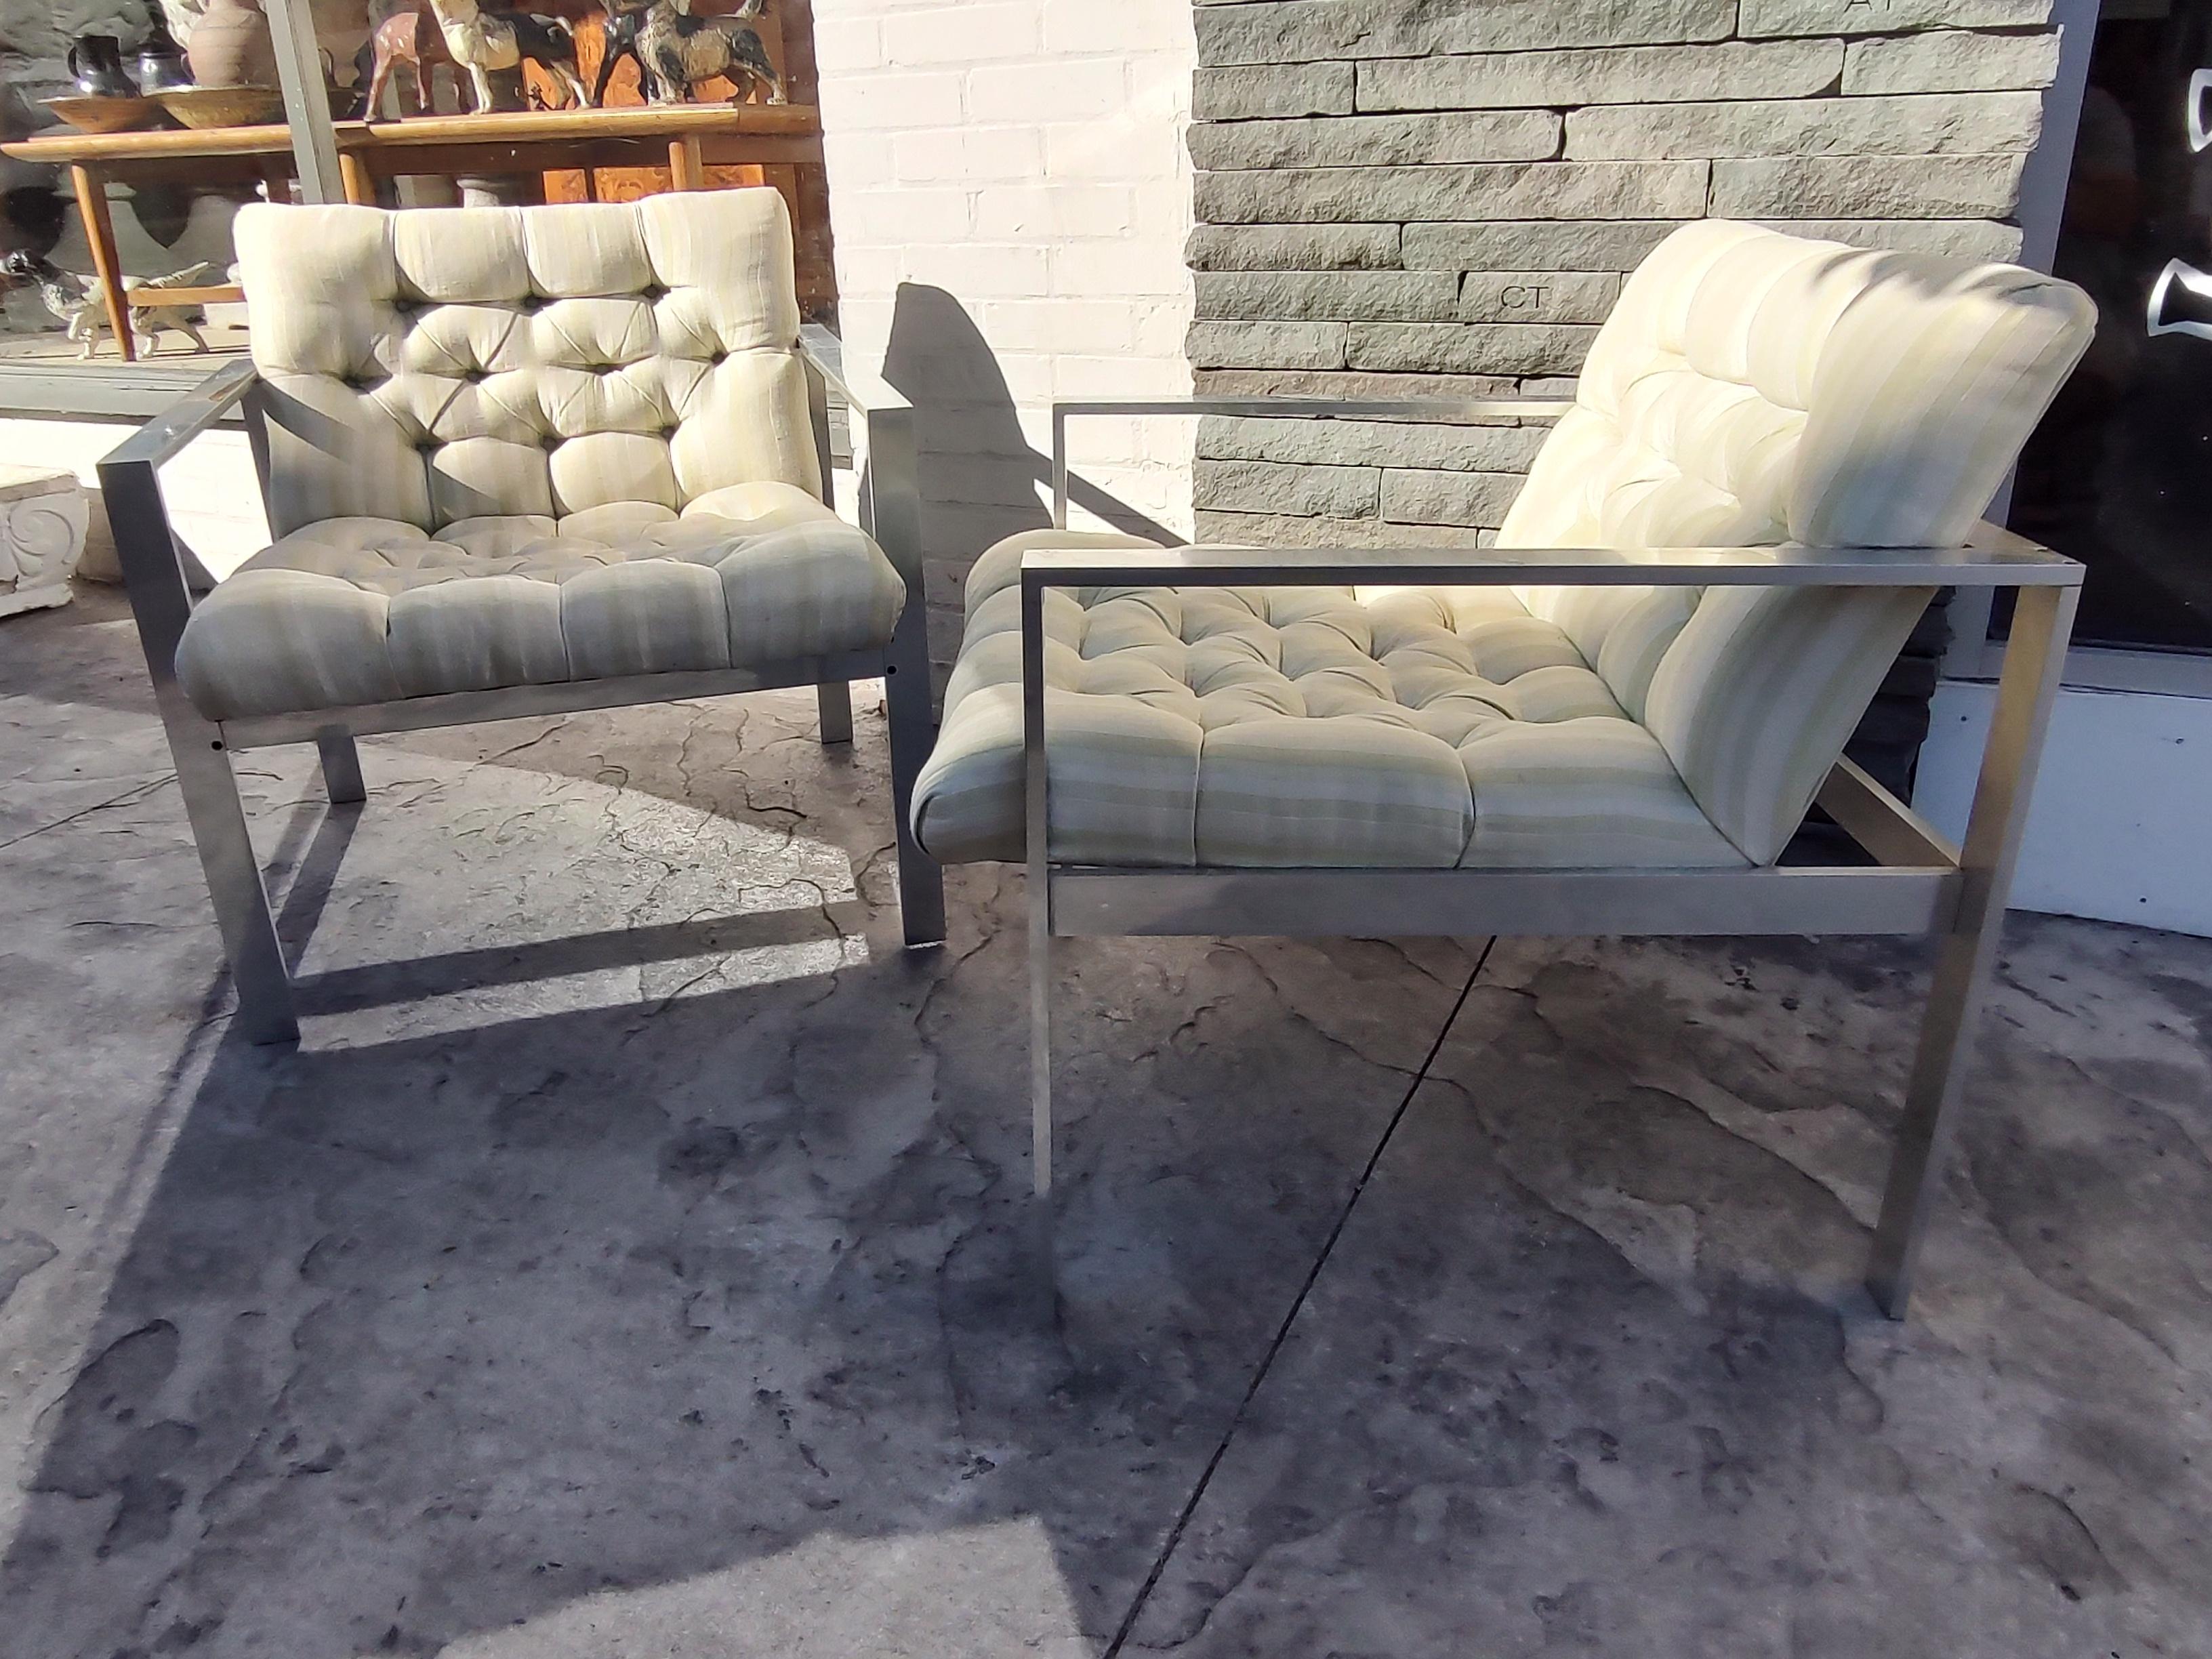 Pair of Mid-Century Modern Tufted Aluminum Lounge Chairs by Harvey Probber For Sale 7